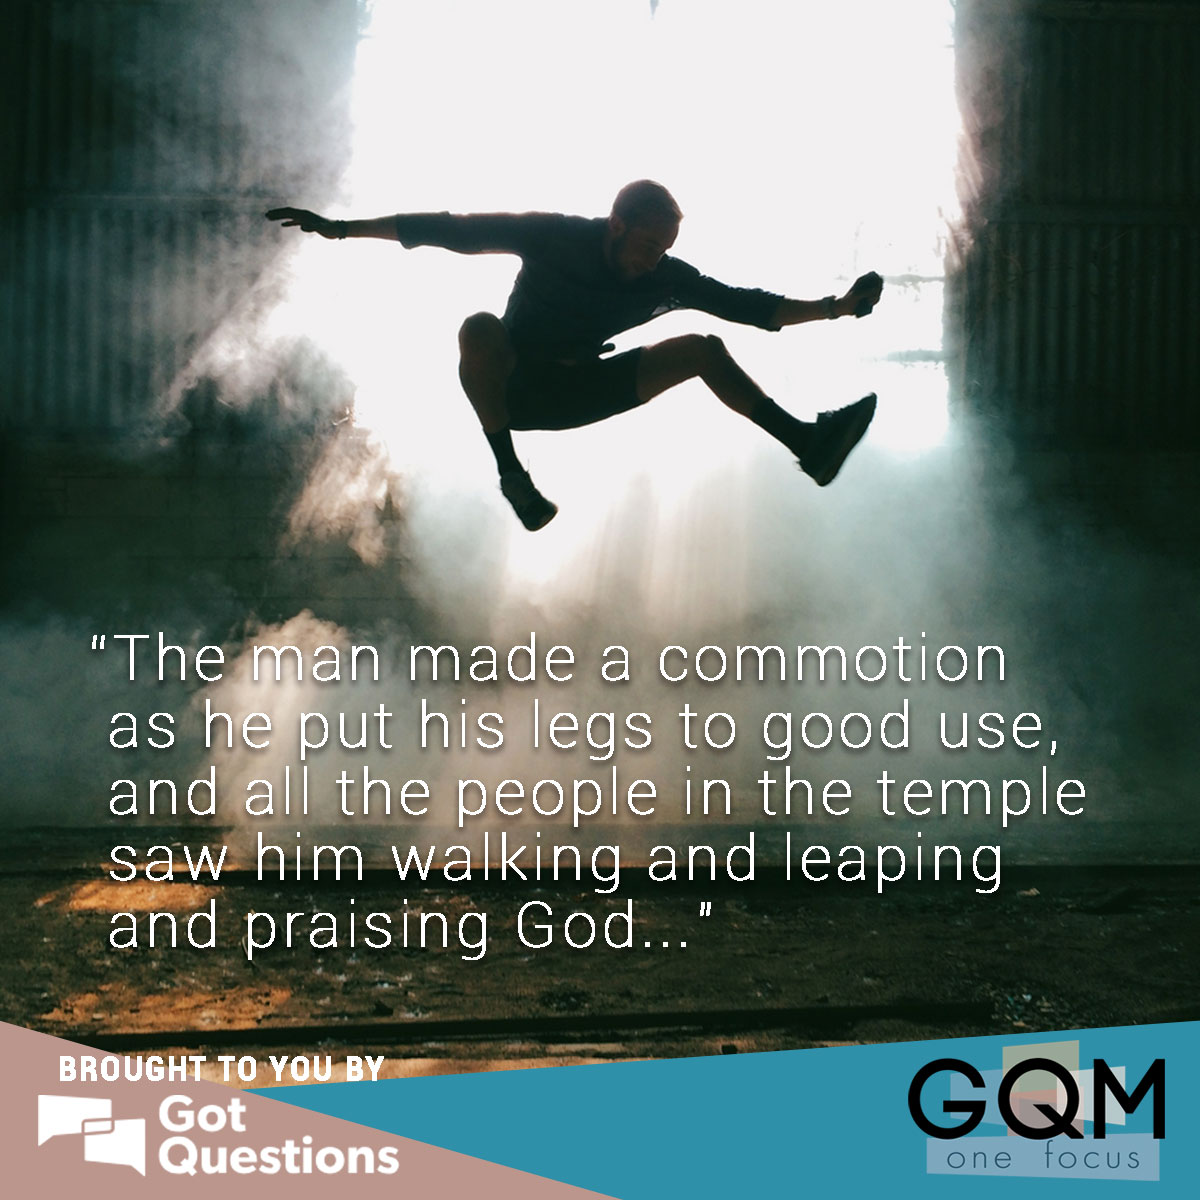 What can we learn from the man who was walking and leaping and praising God?